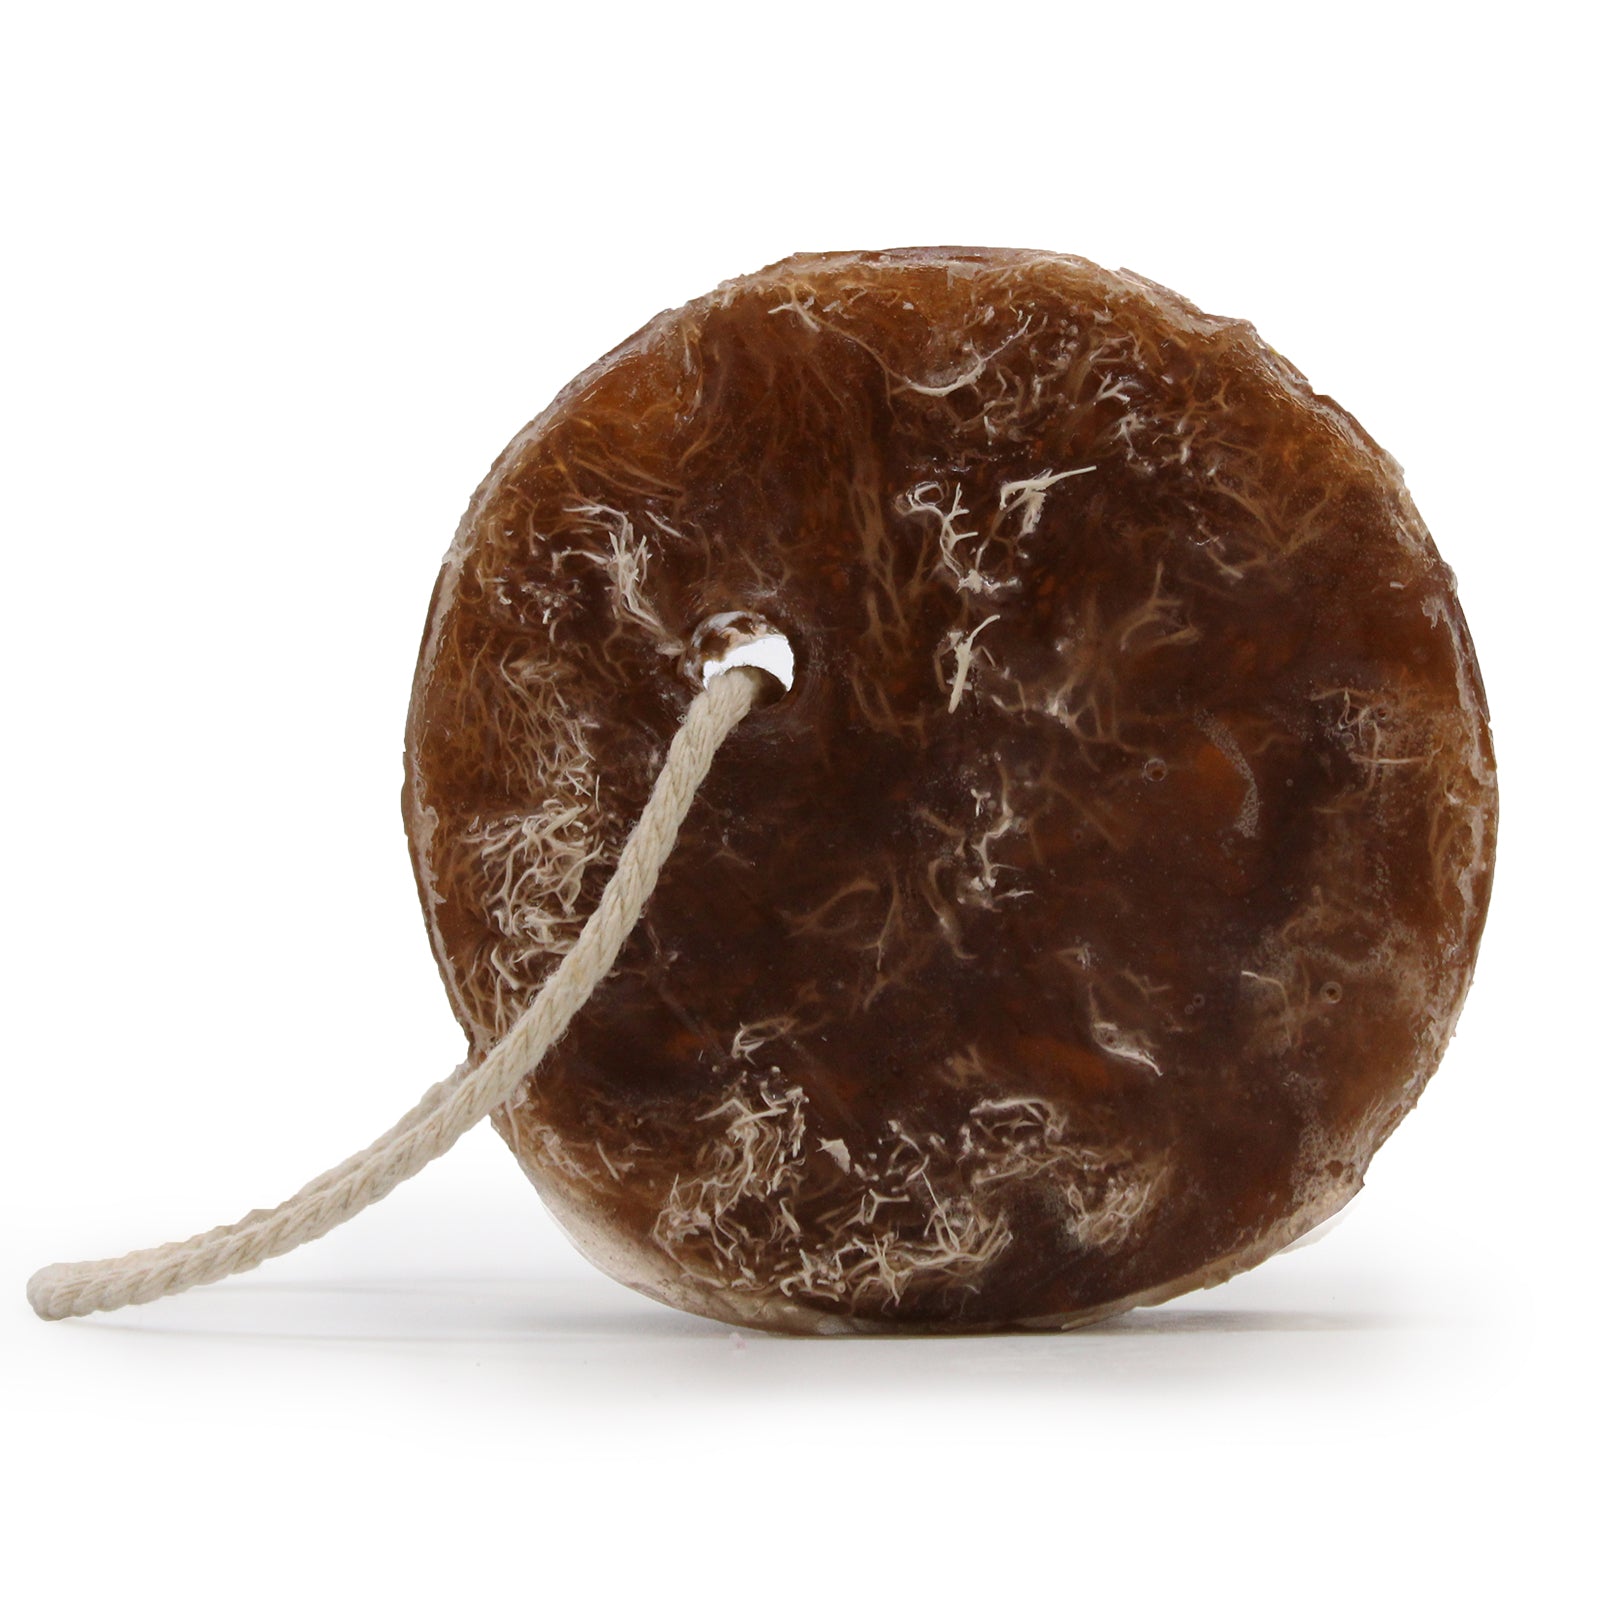 Fruity Scrub Soap on a Rope - Coconut